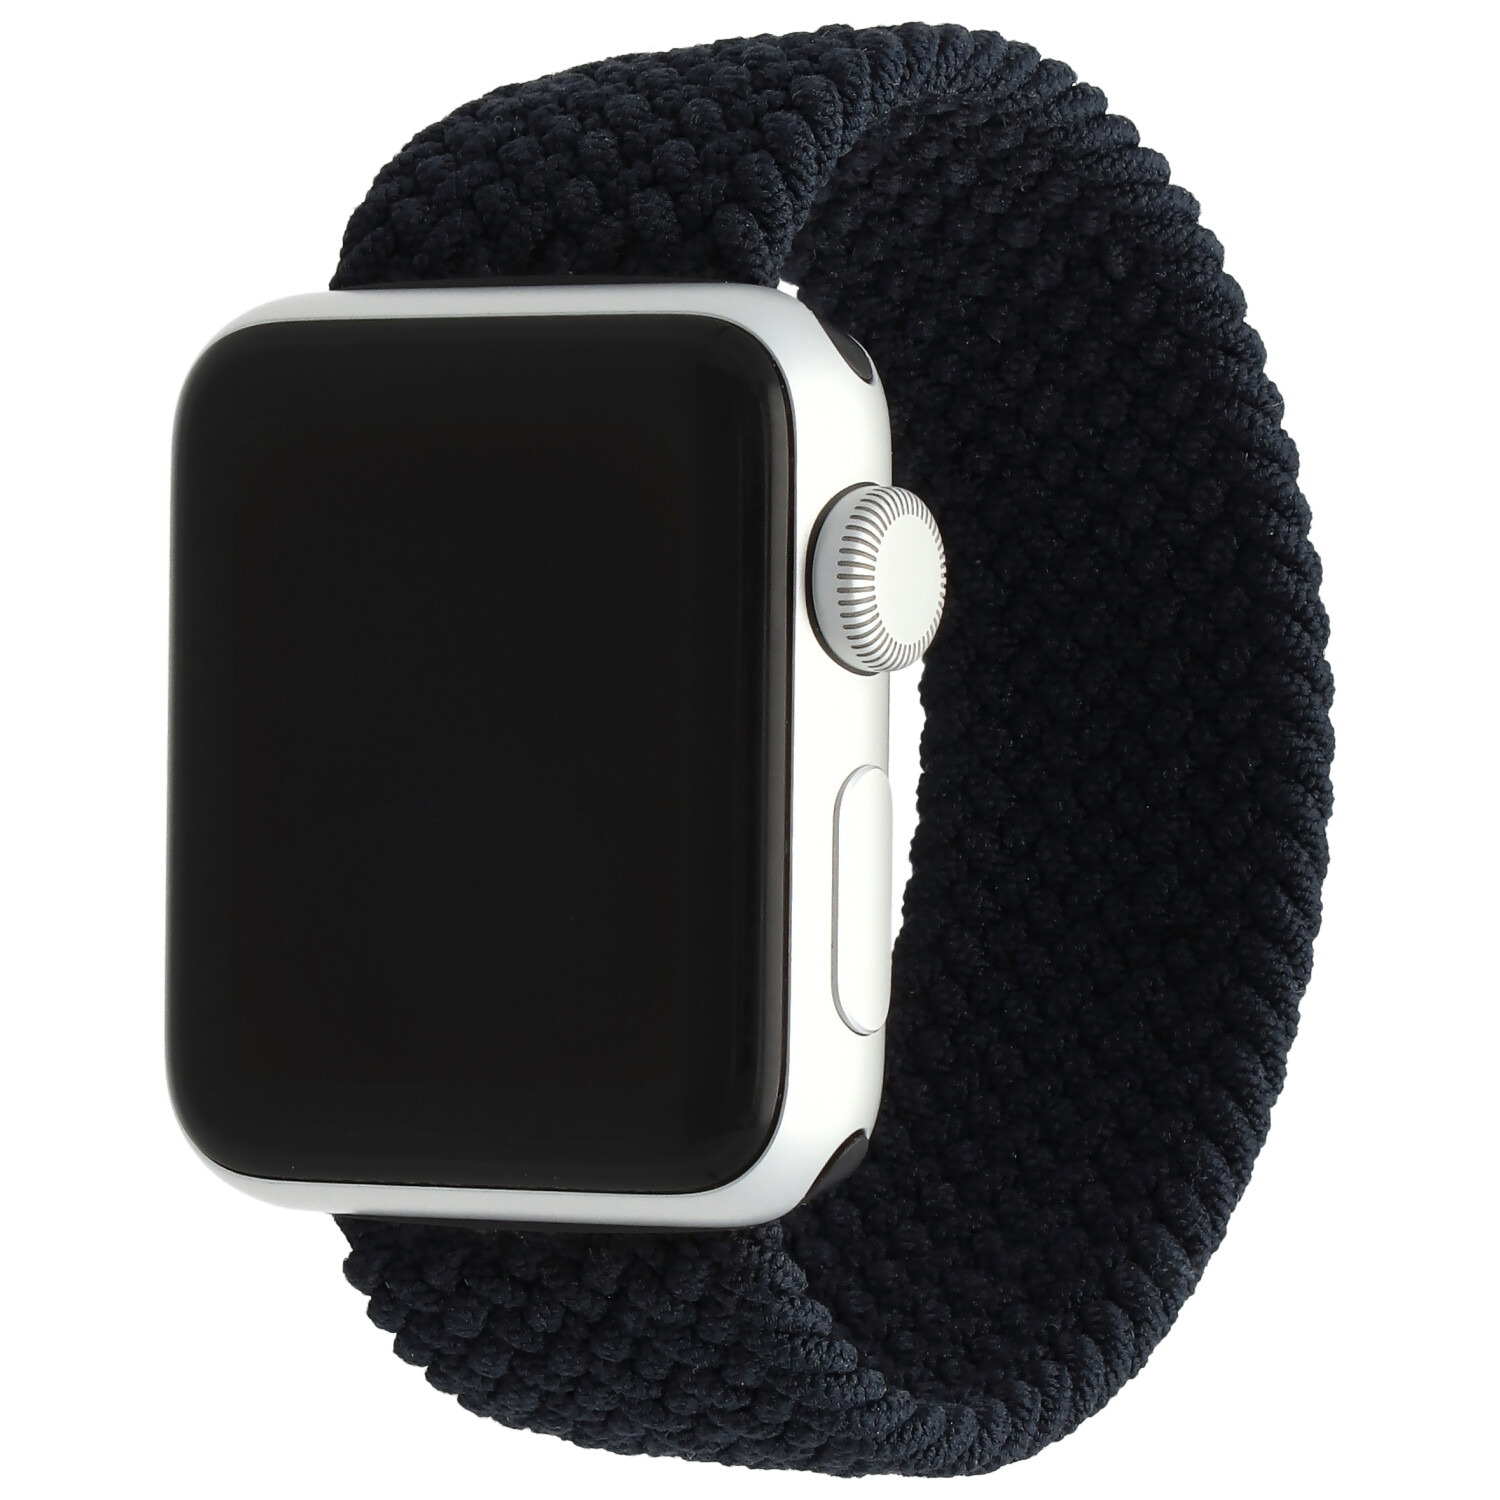 Apple Watch Nylon Braided Solo Loop Strap - Charcoal